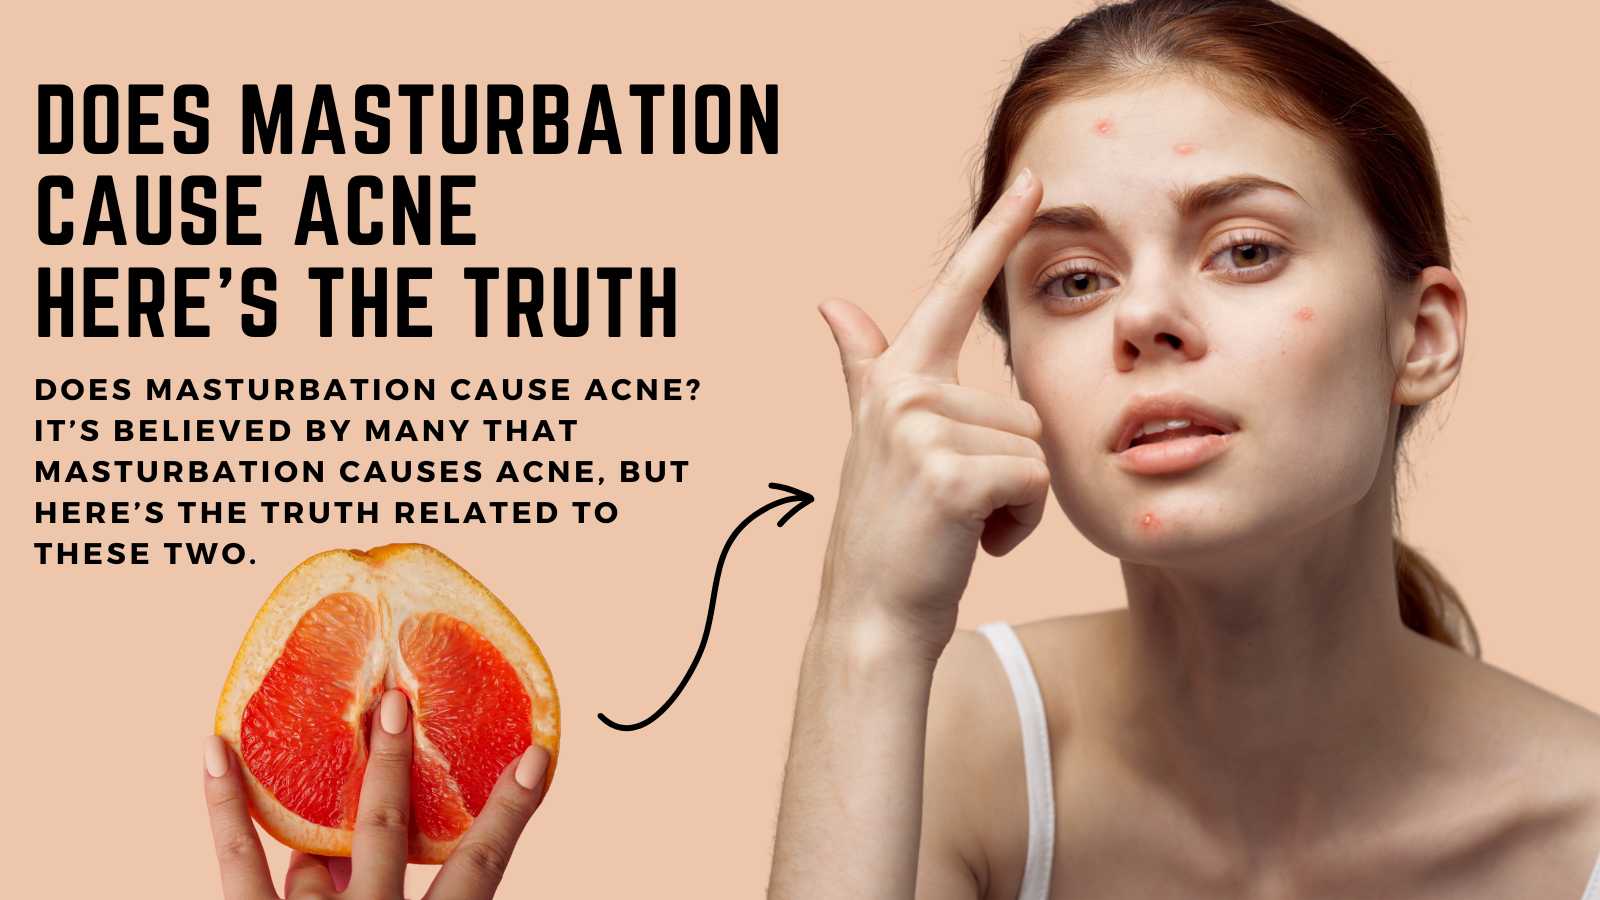 Does Masturbation Cause Acne Here’s the Truth